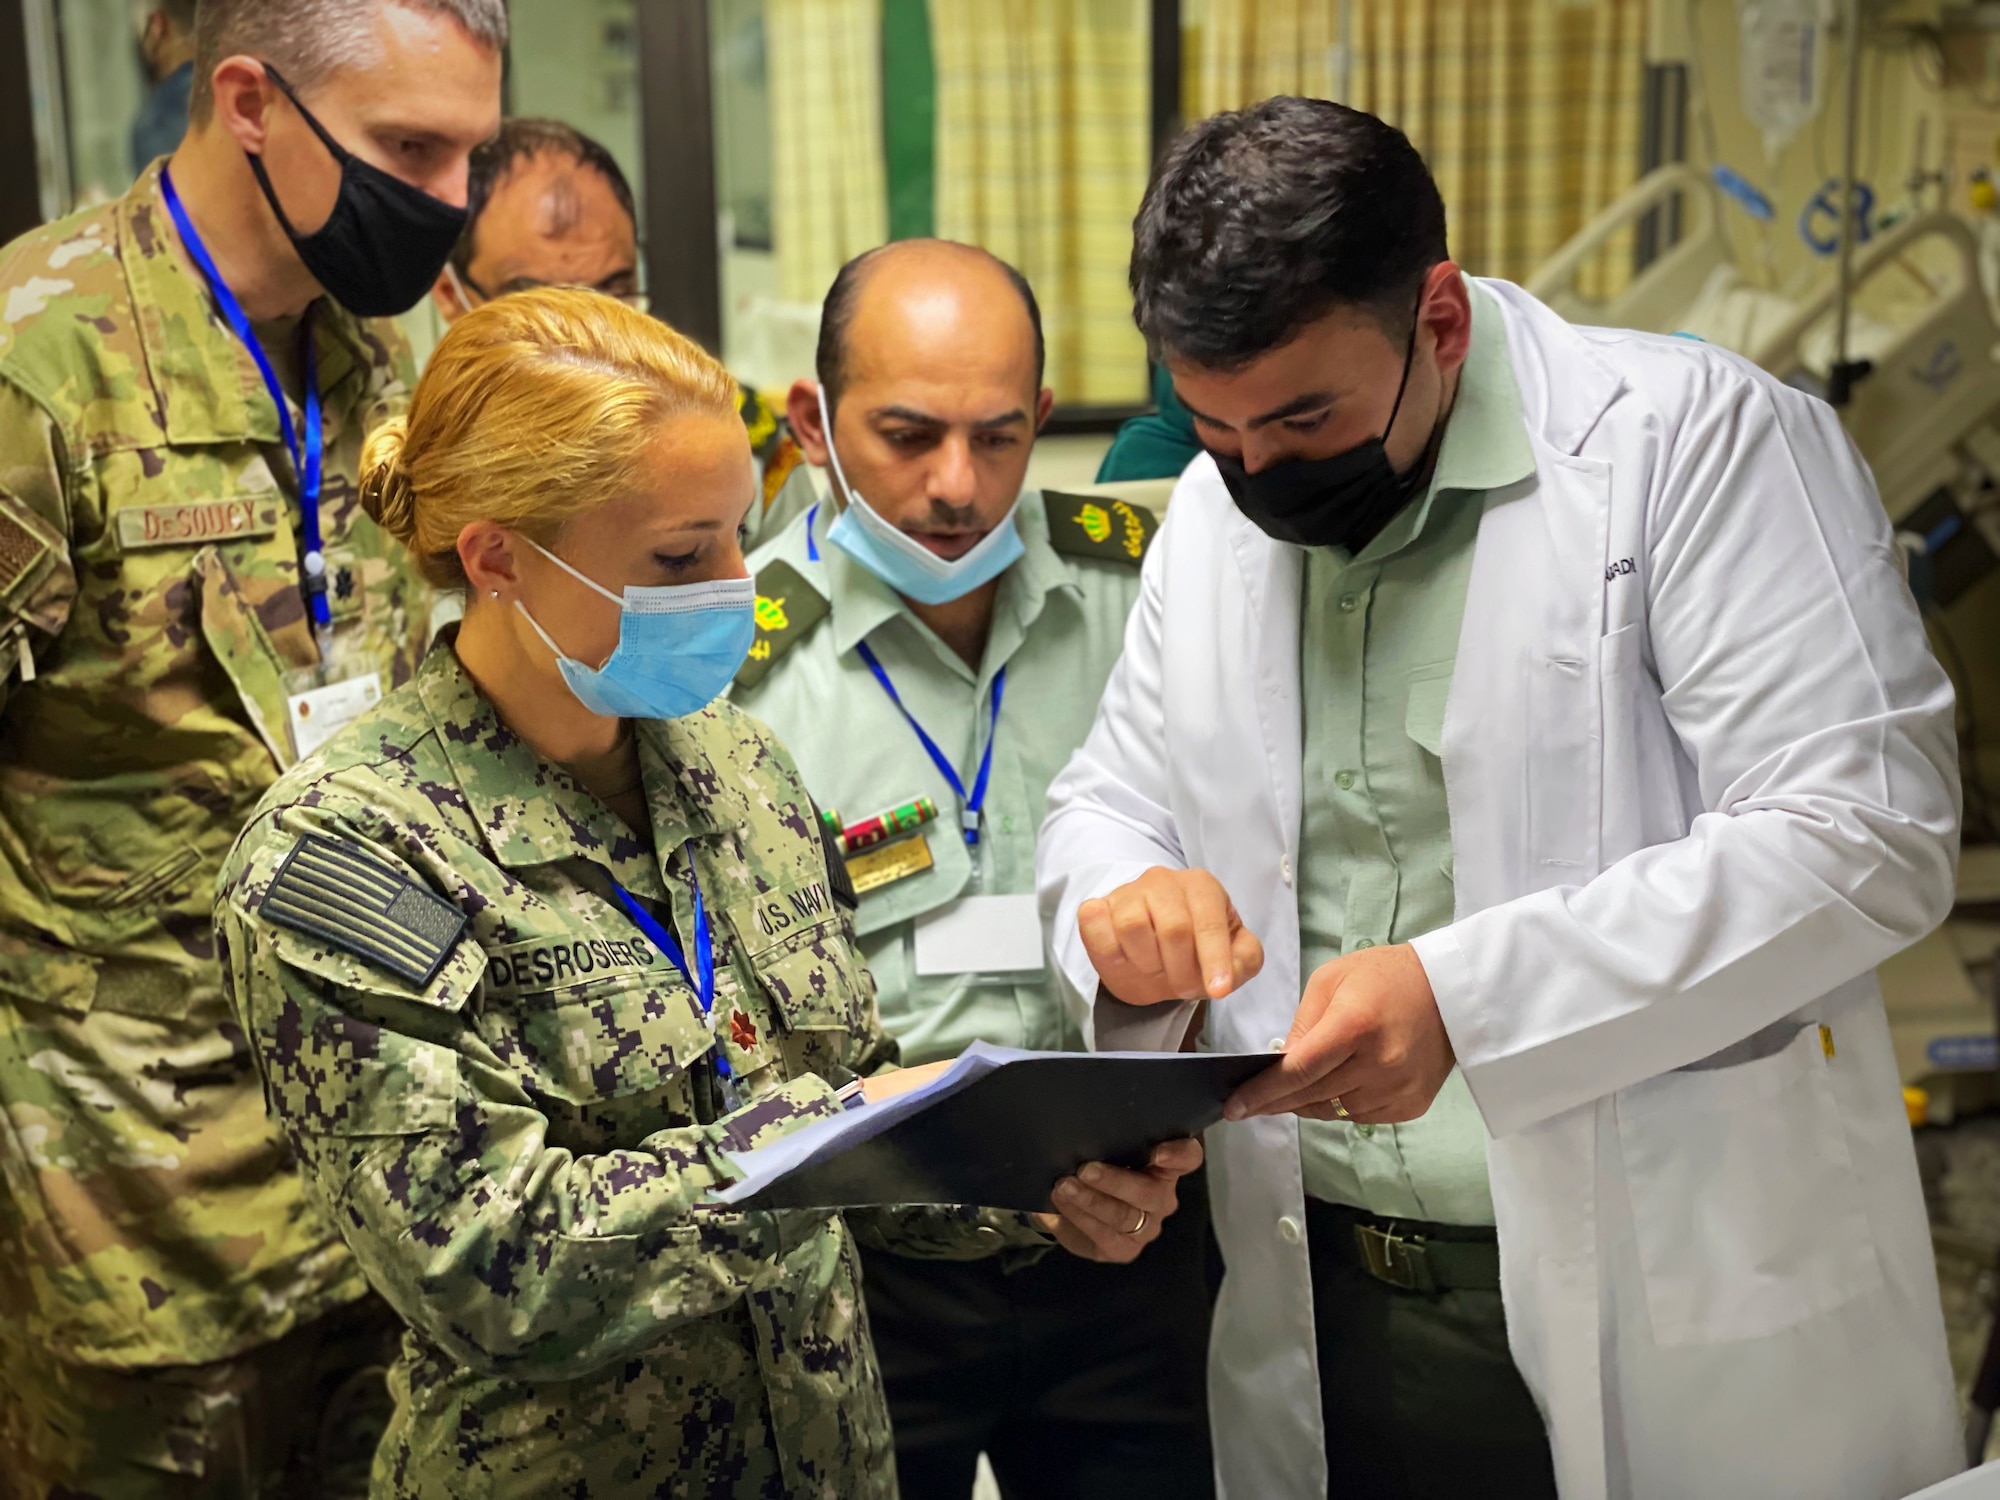 Dr. Rabadi, Jordanian Royal Medical Service intensive care unit doctor, and Lt. Cmdr. Taylor DesRosiers, Walter Reed Medical Center critical care fellow, review a patient’s paperwork inside the intensive care unit at the King Hussein Medical Center May 9, 2022 in Amman, Jordan.